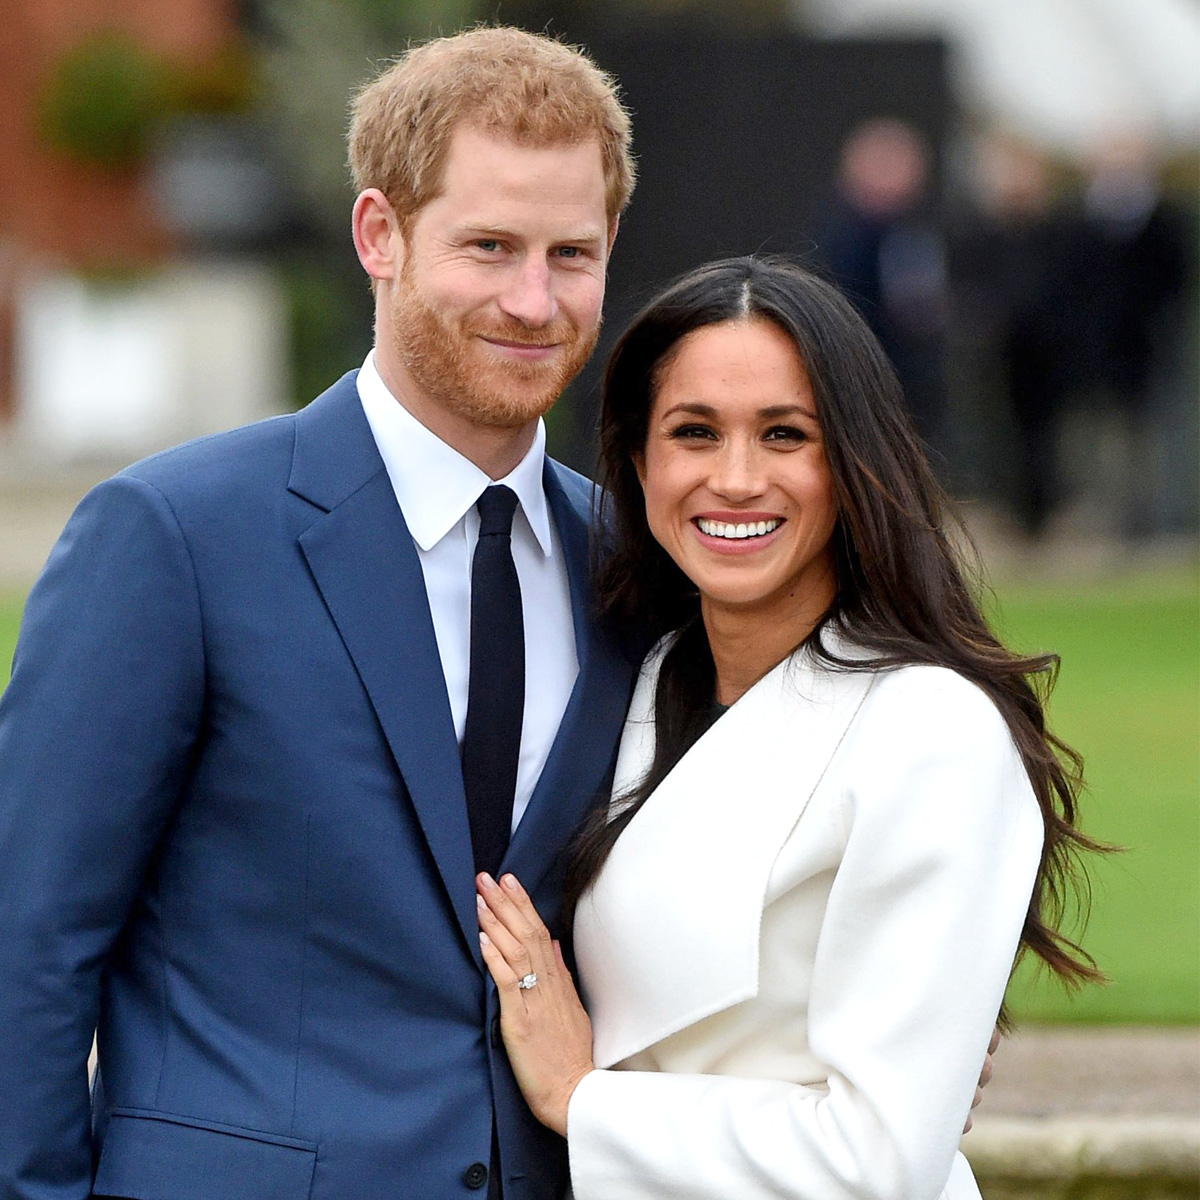 Prince Harry Praises Meghan Markle as an “Exceptional Human Being”